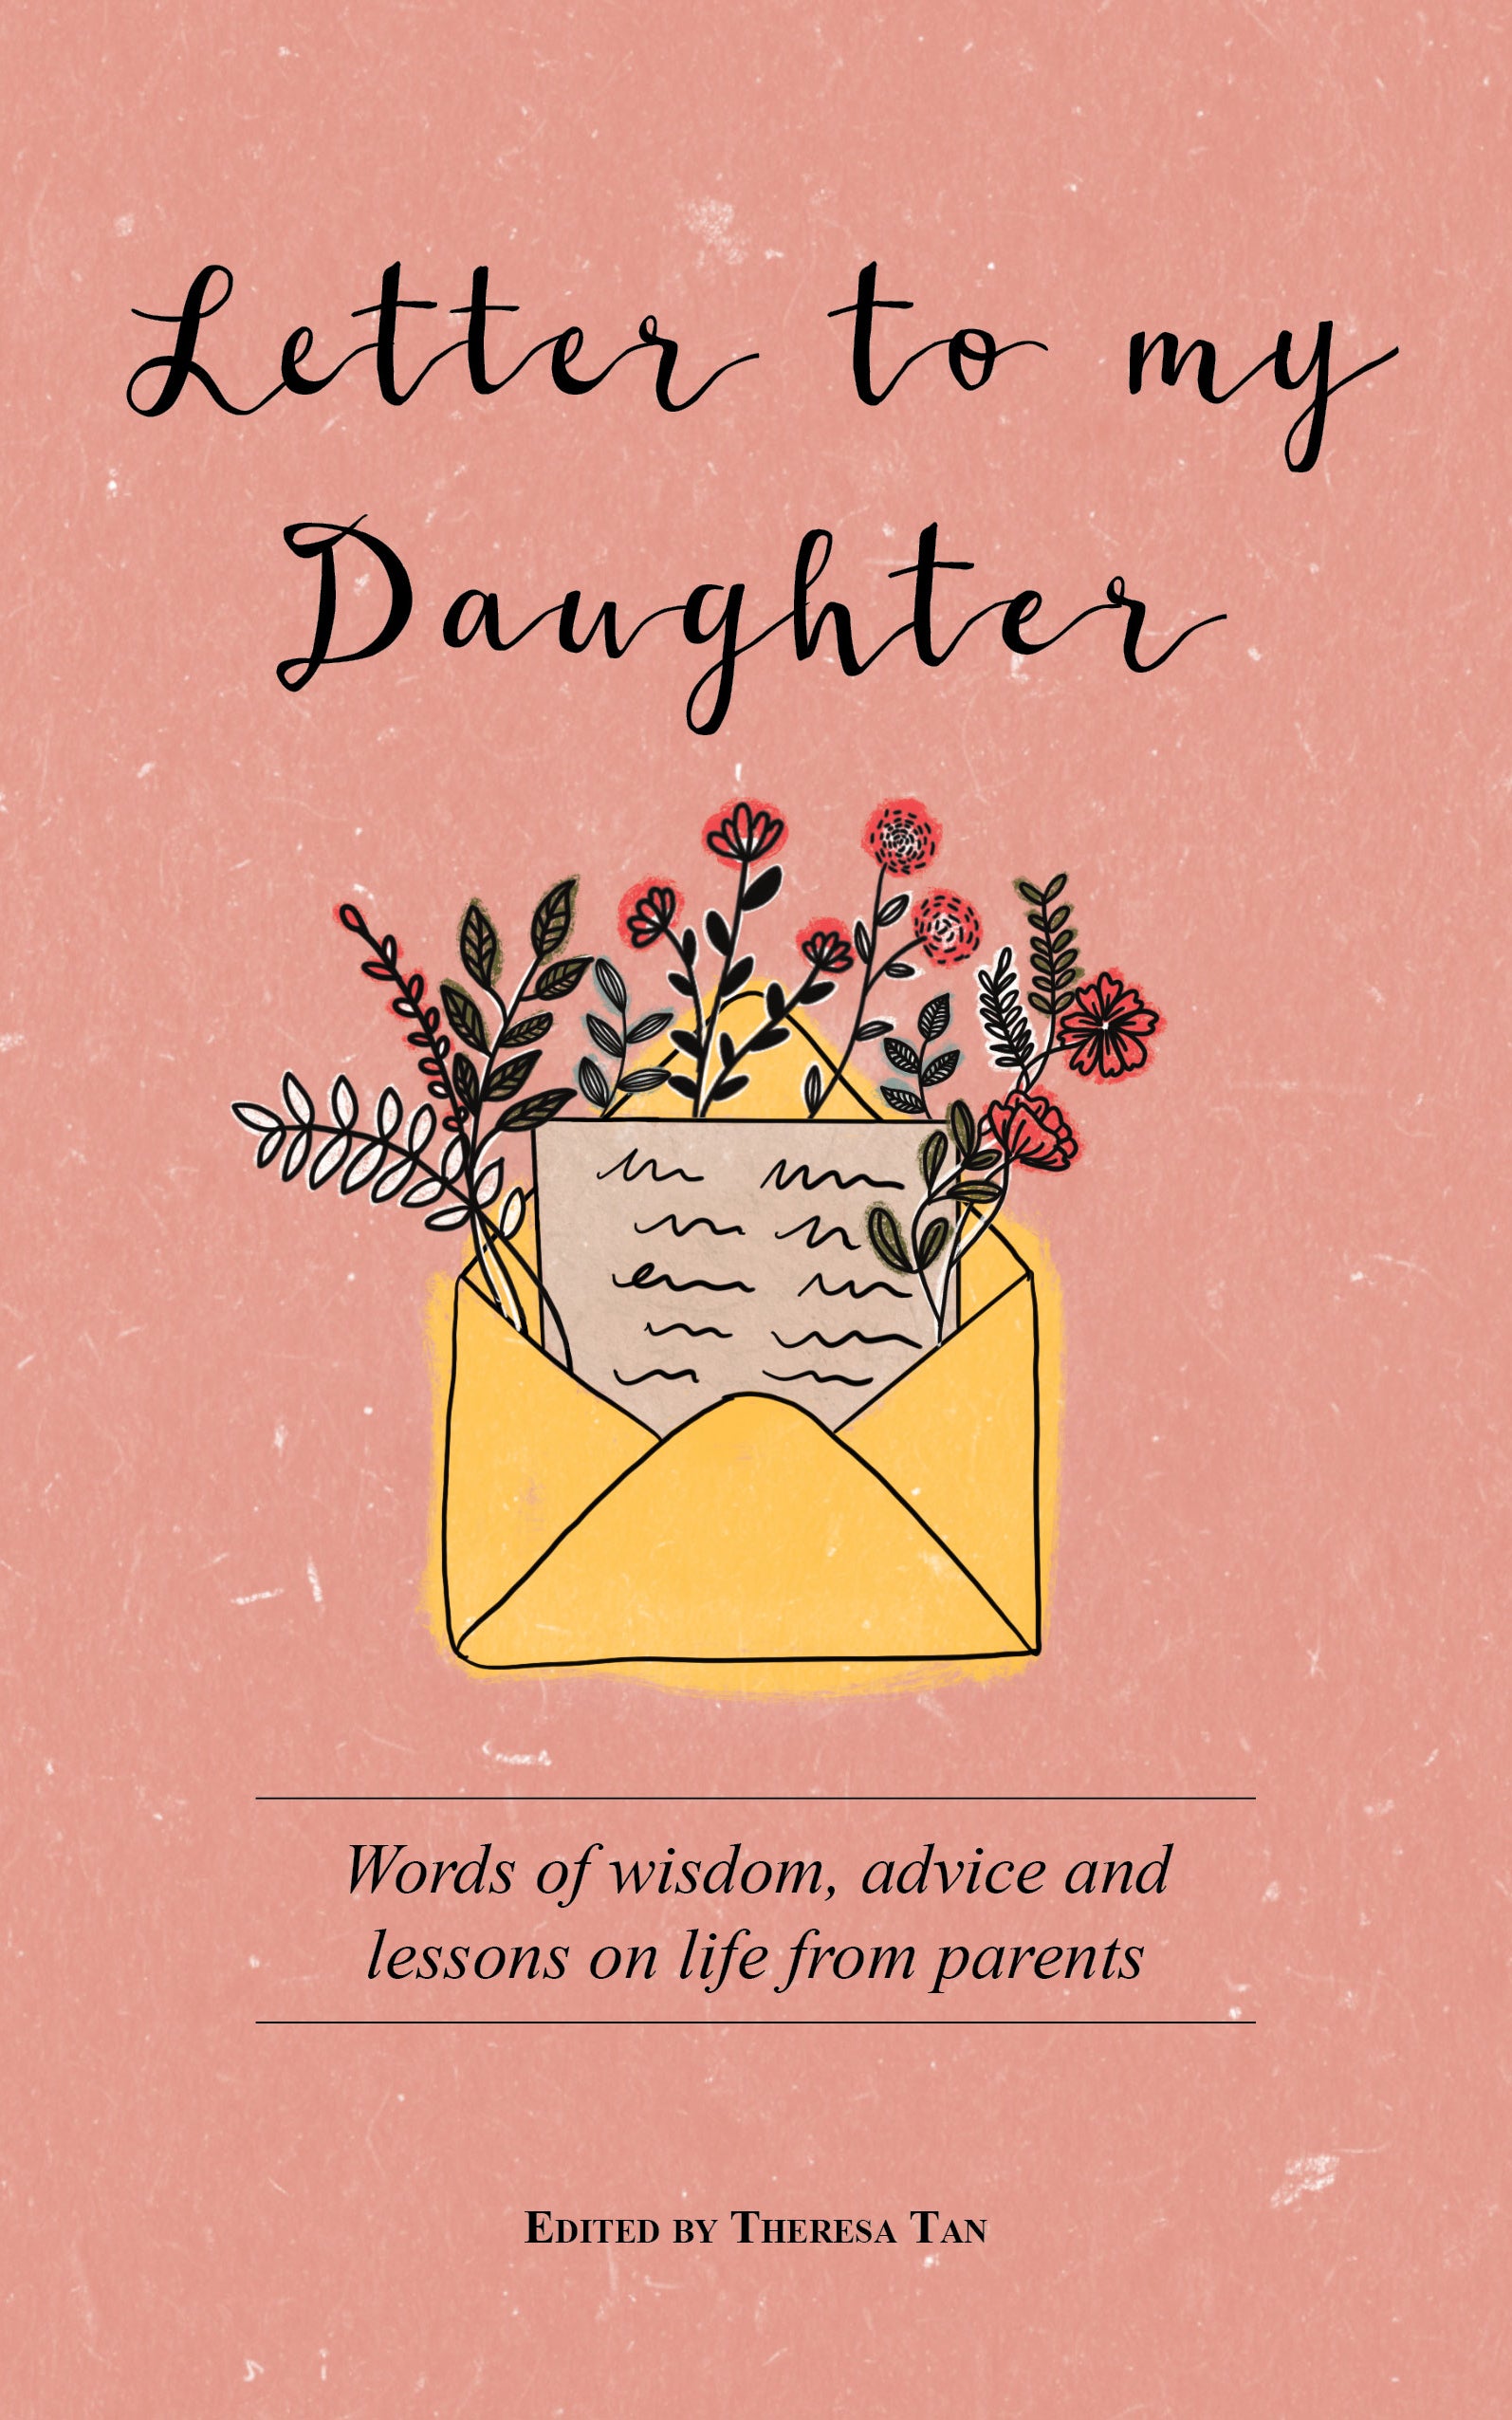 Letter to My Daughter: Words of wisdom, advice and lessons on life from parents